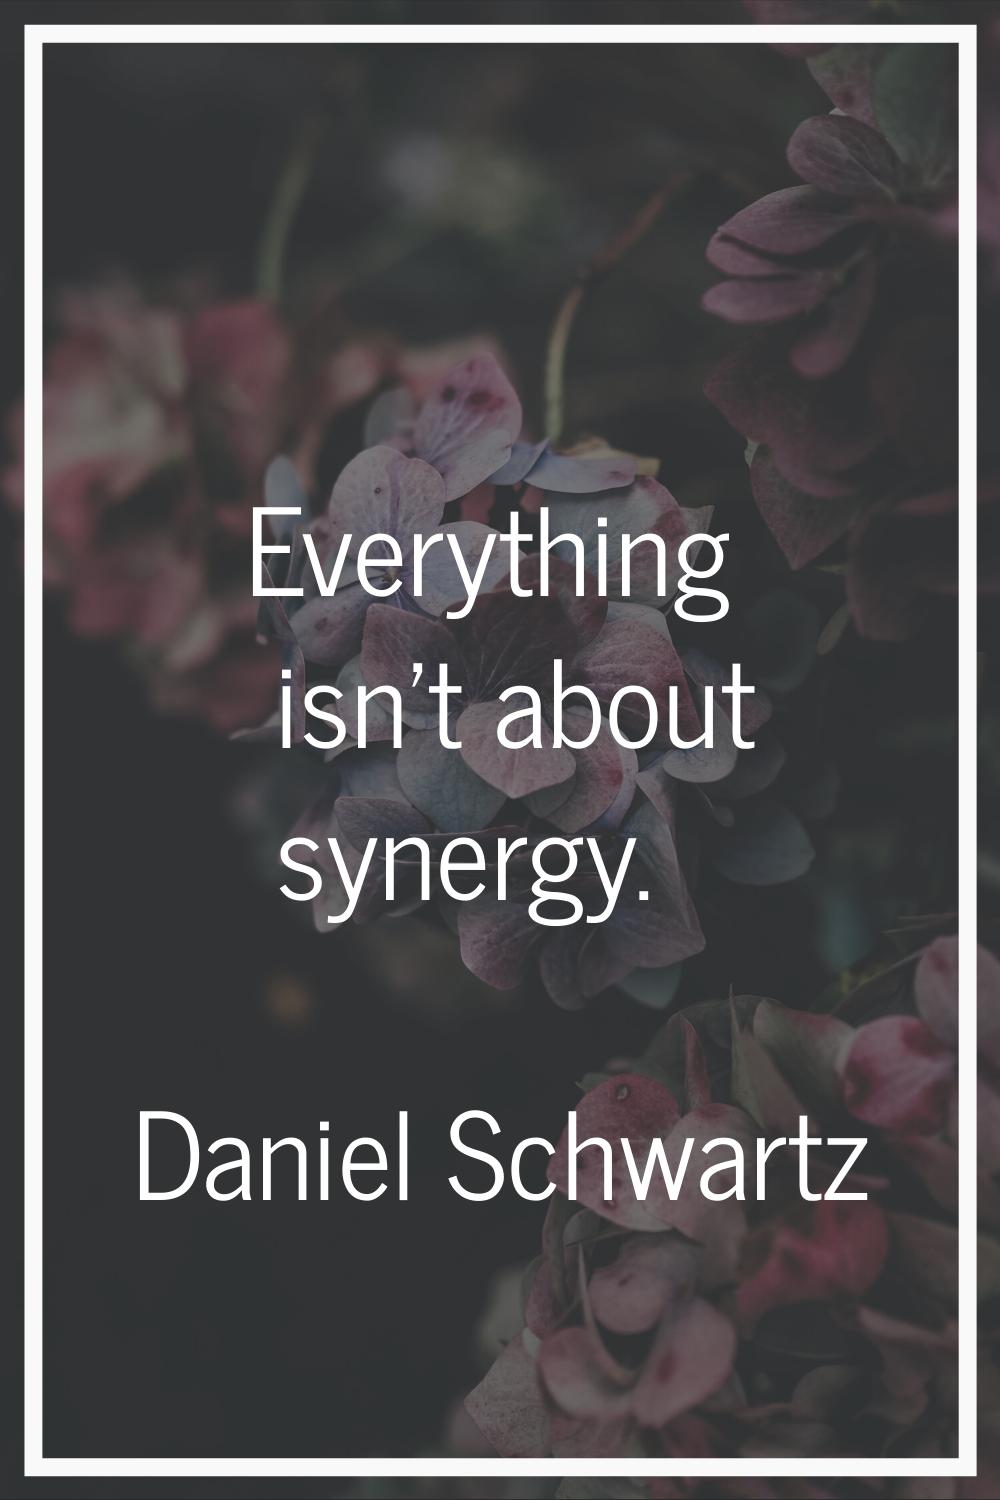 Everything isn't about synergy.